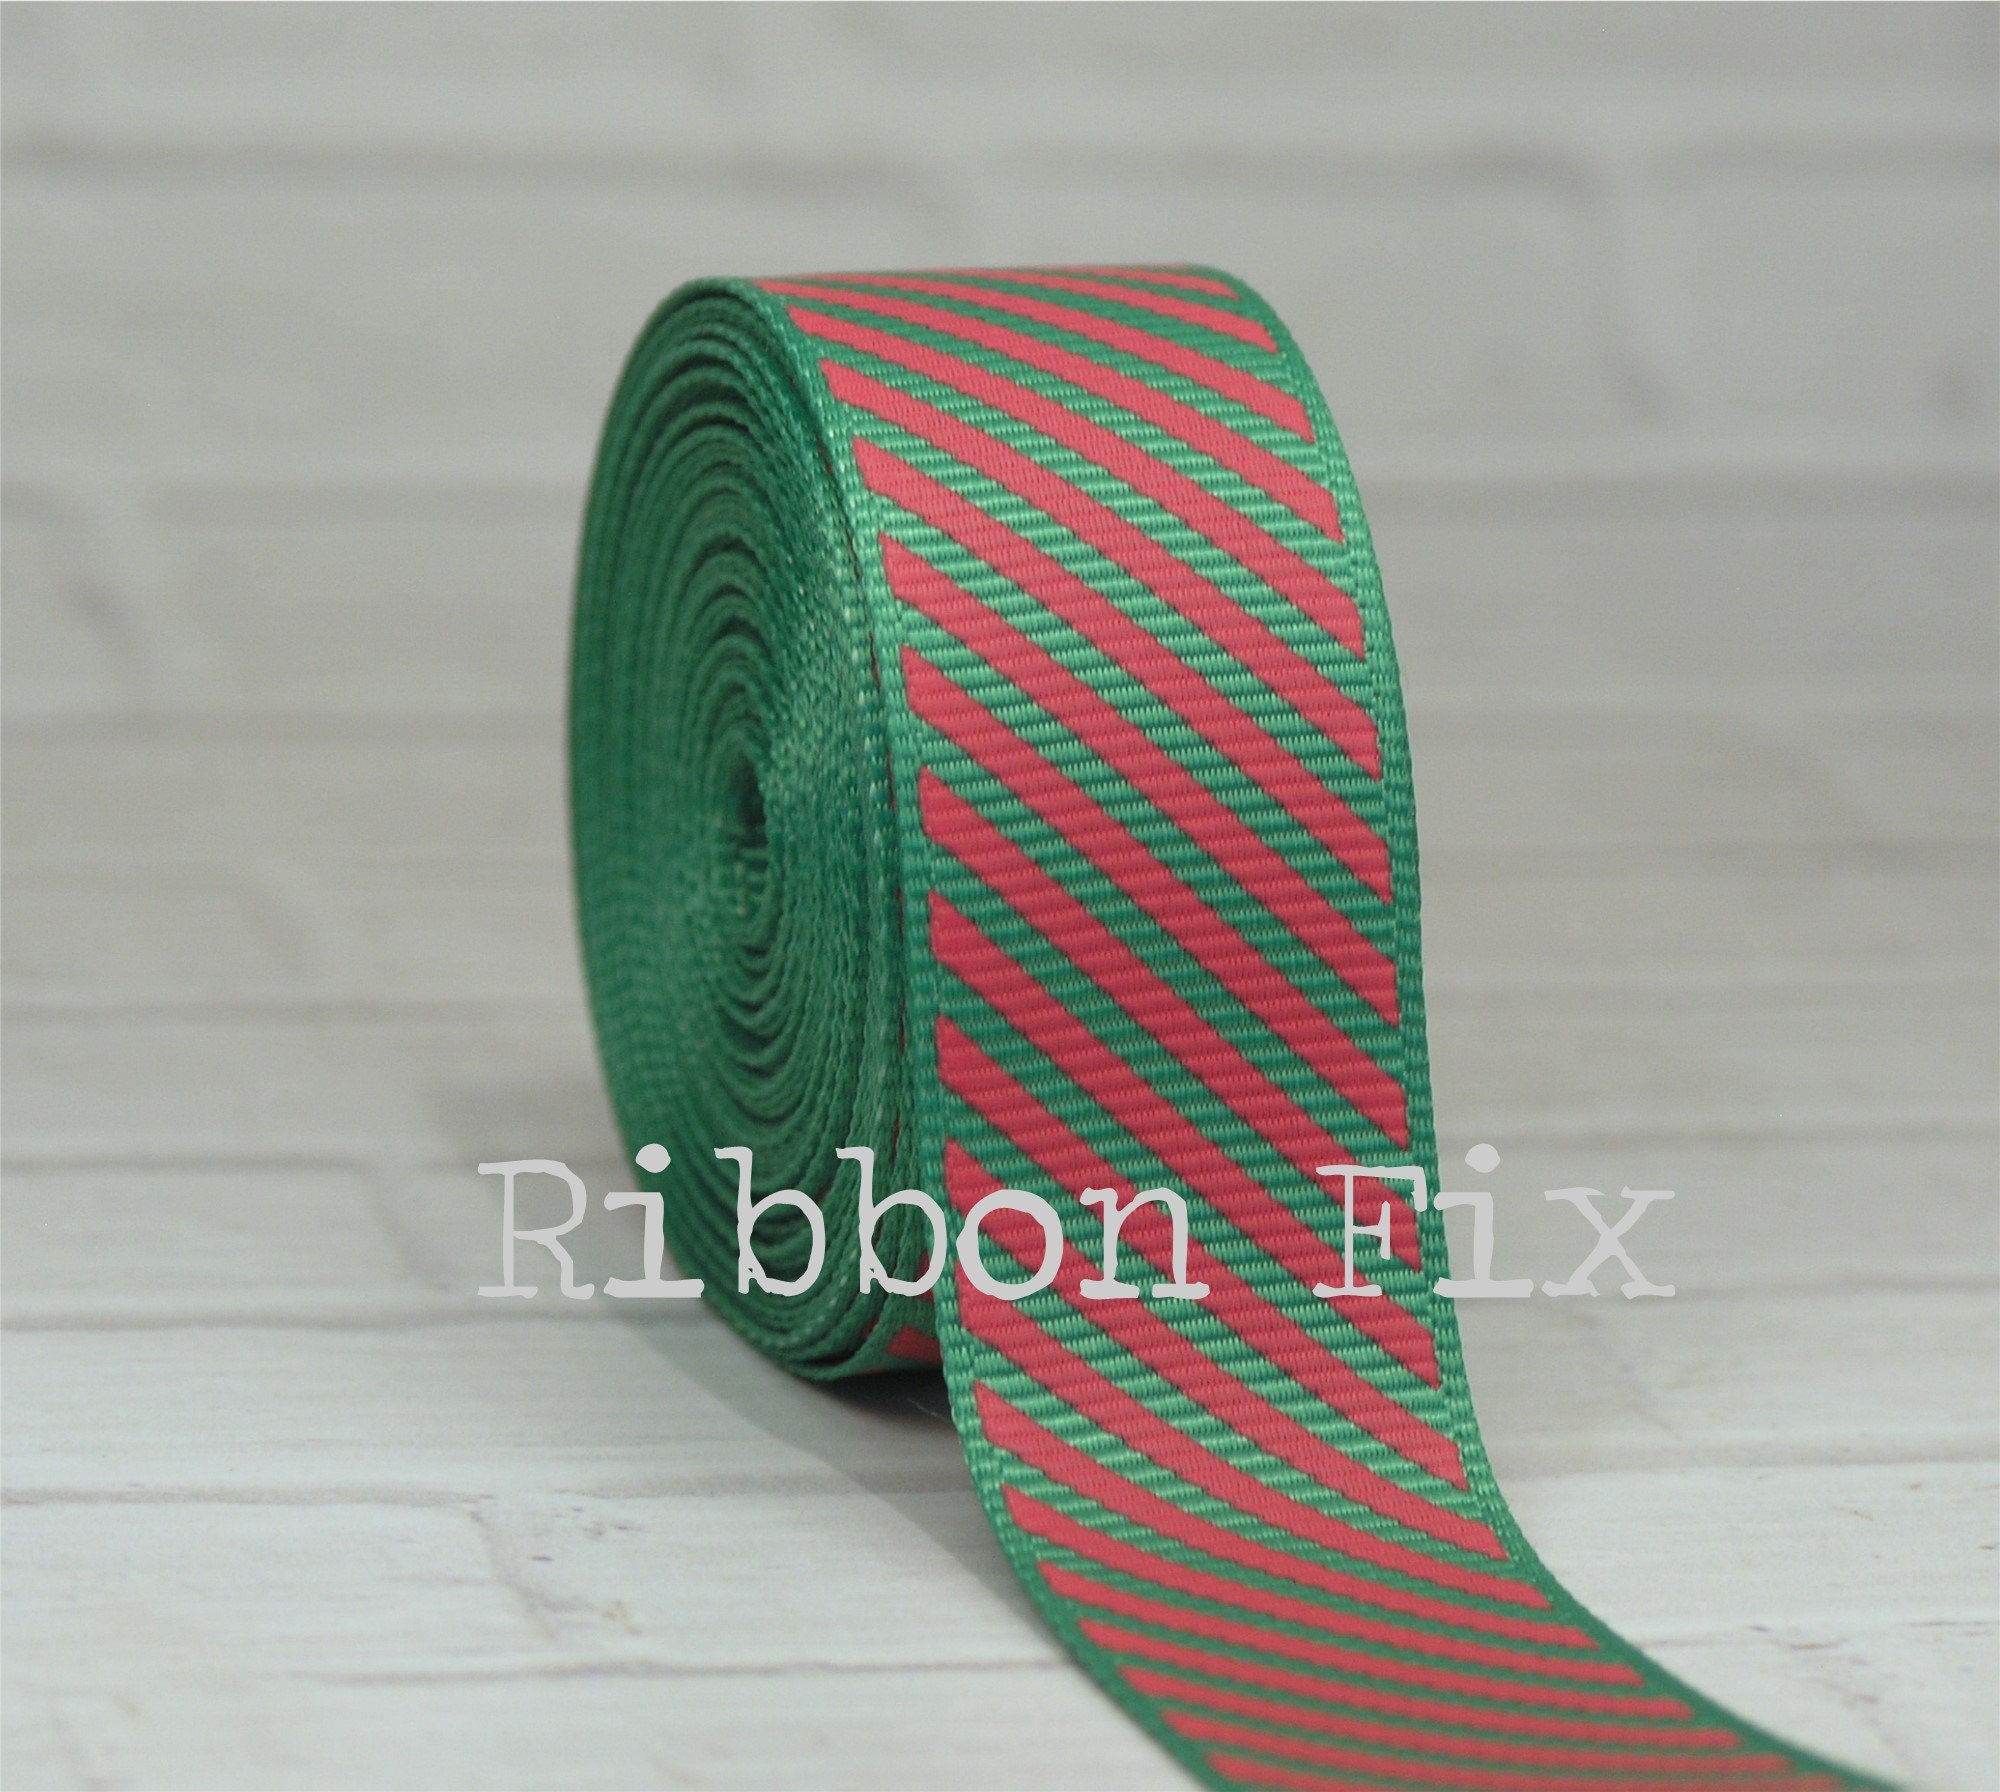 Striped Grosgrain Ribbon 1.5 inches Red Green Christmas 3 yards